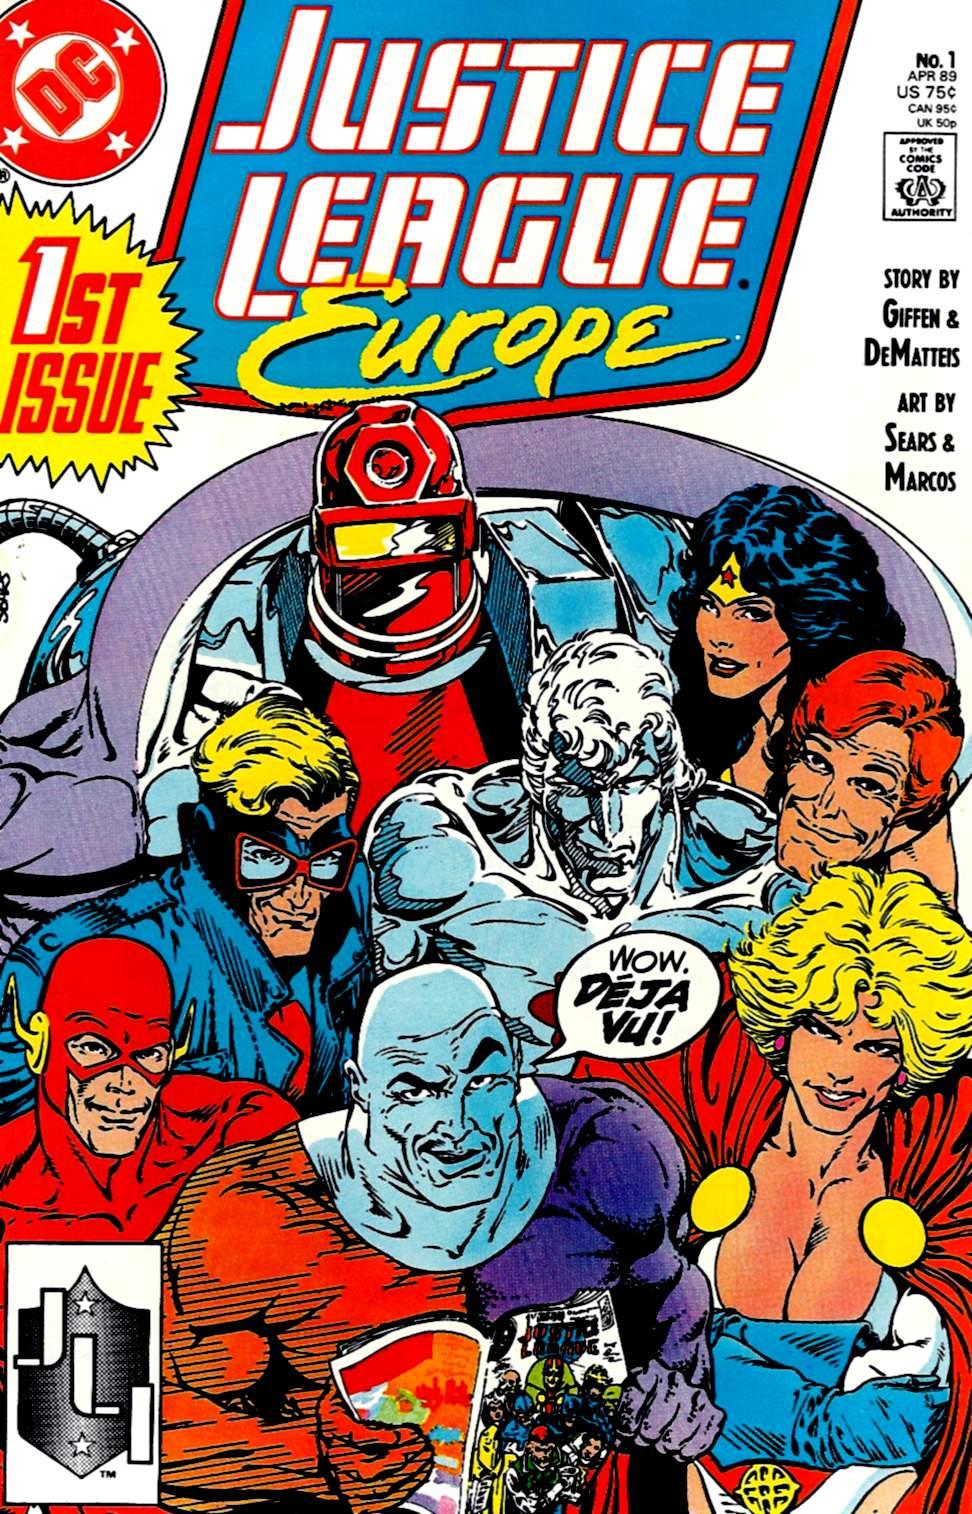 Justice League Europe #1 (1989) Cover